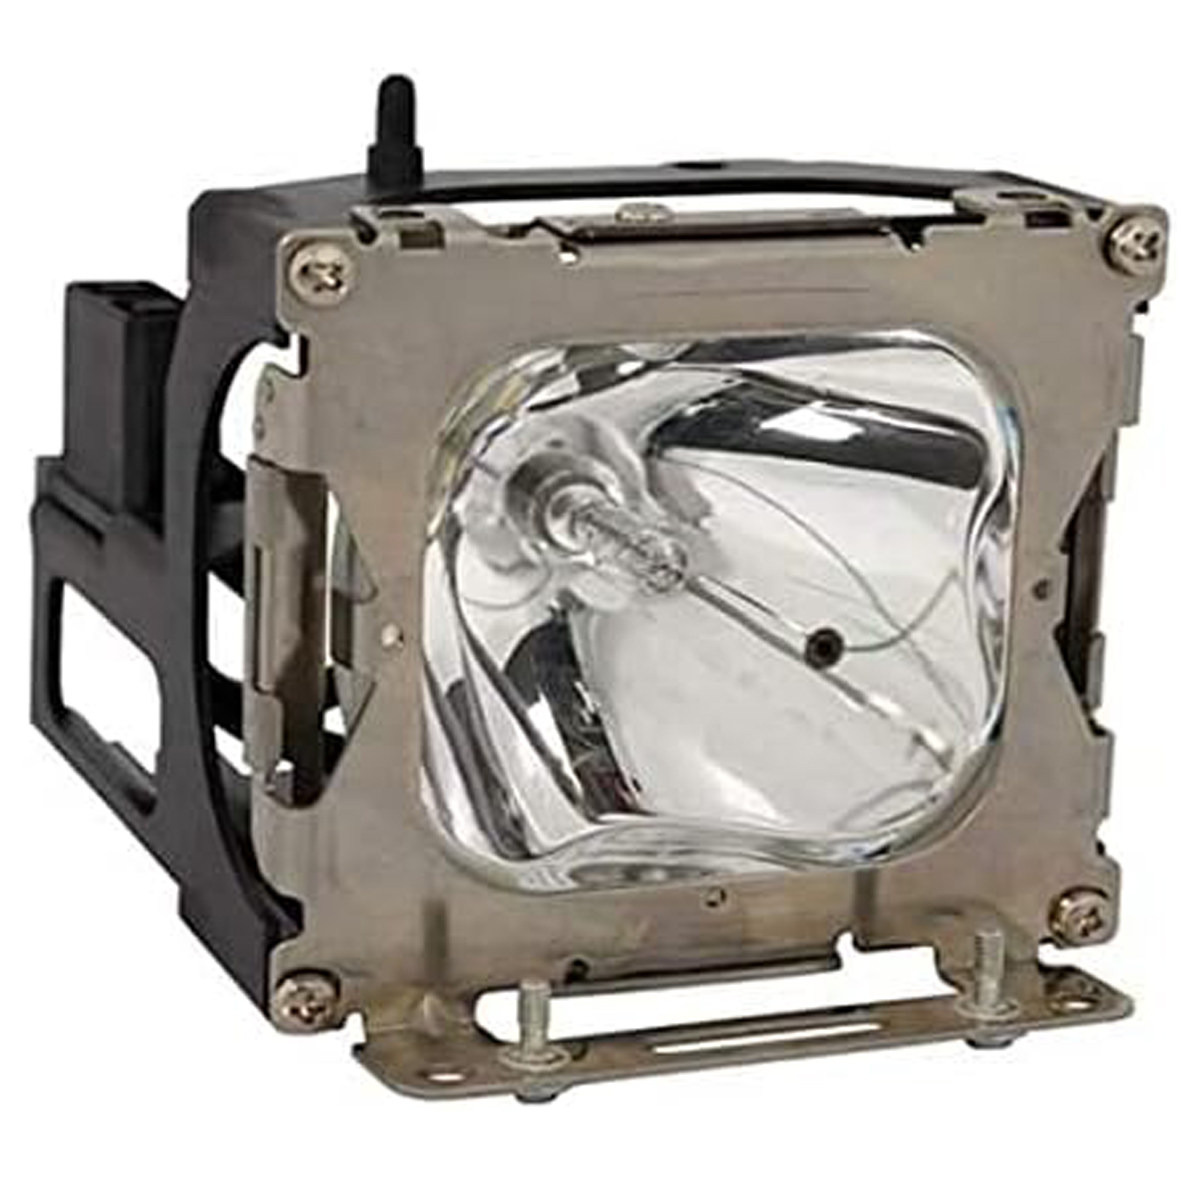 Replacement Projector lamp DT00202 For Hitachi Projector